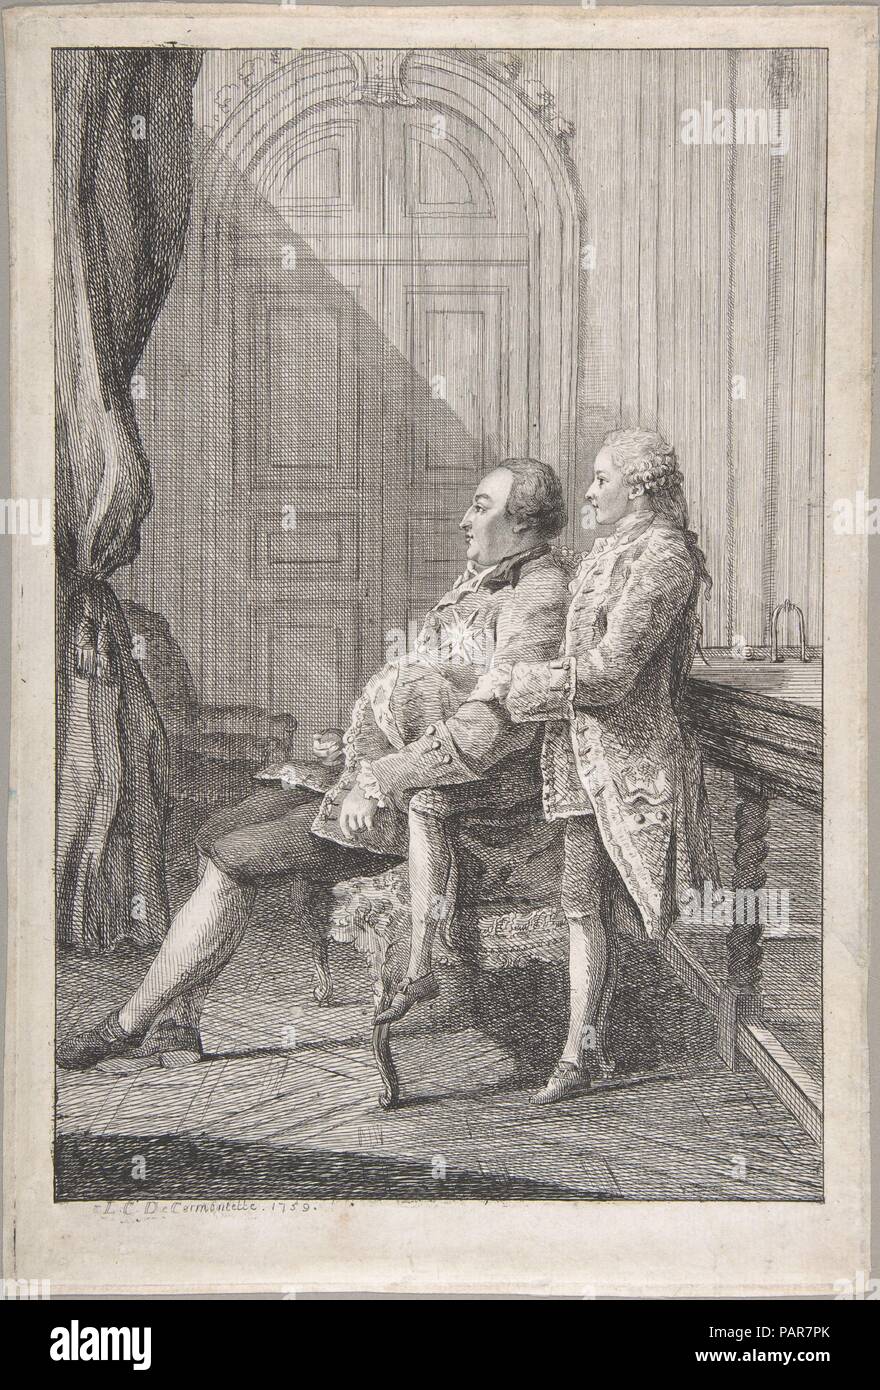 Portrait of Louis-Philippe, Duc d'Orleans and His Son Louis-Phillipe Joseph, Duc de Chartres. Artist: Louis de Carmontelle (French, Paris 1717-1806 Paris). Dimensions: Sheet: 11 11/16 × 7 7/8 in. (29.7 × 20 cm)  Plate: 11 5/8 x 7 3/4in. (29.5 x 19.7cm). Date: 1759.  Born into the lower classes, Carmontelle served as aide-de-camp and topographer to the Orléans regiment during the Seven Years War, when his caricatures gained him considerable popularity.  After the war he was employed by the Orléans household in various capacities, including reader to the young duc de Chartres.  Carmontelle is be Stock Photo